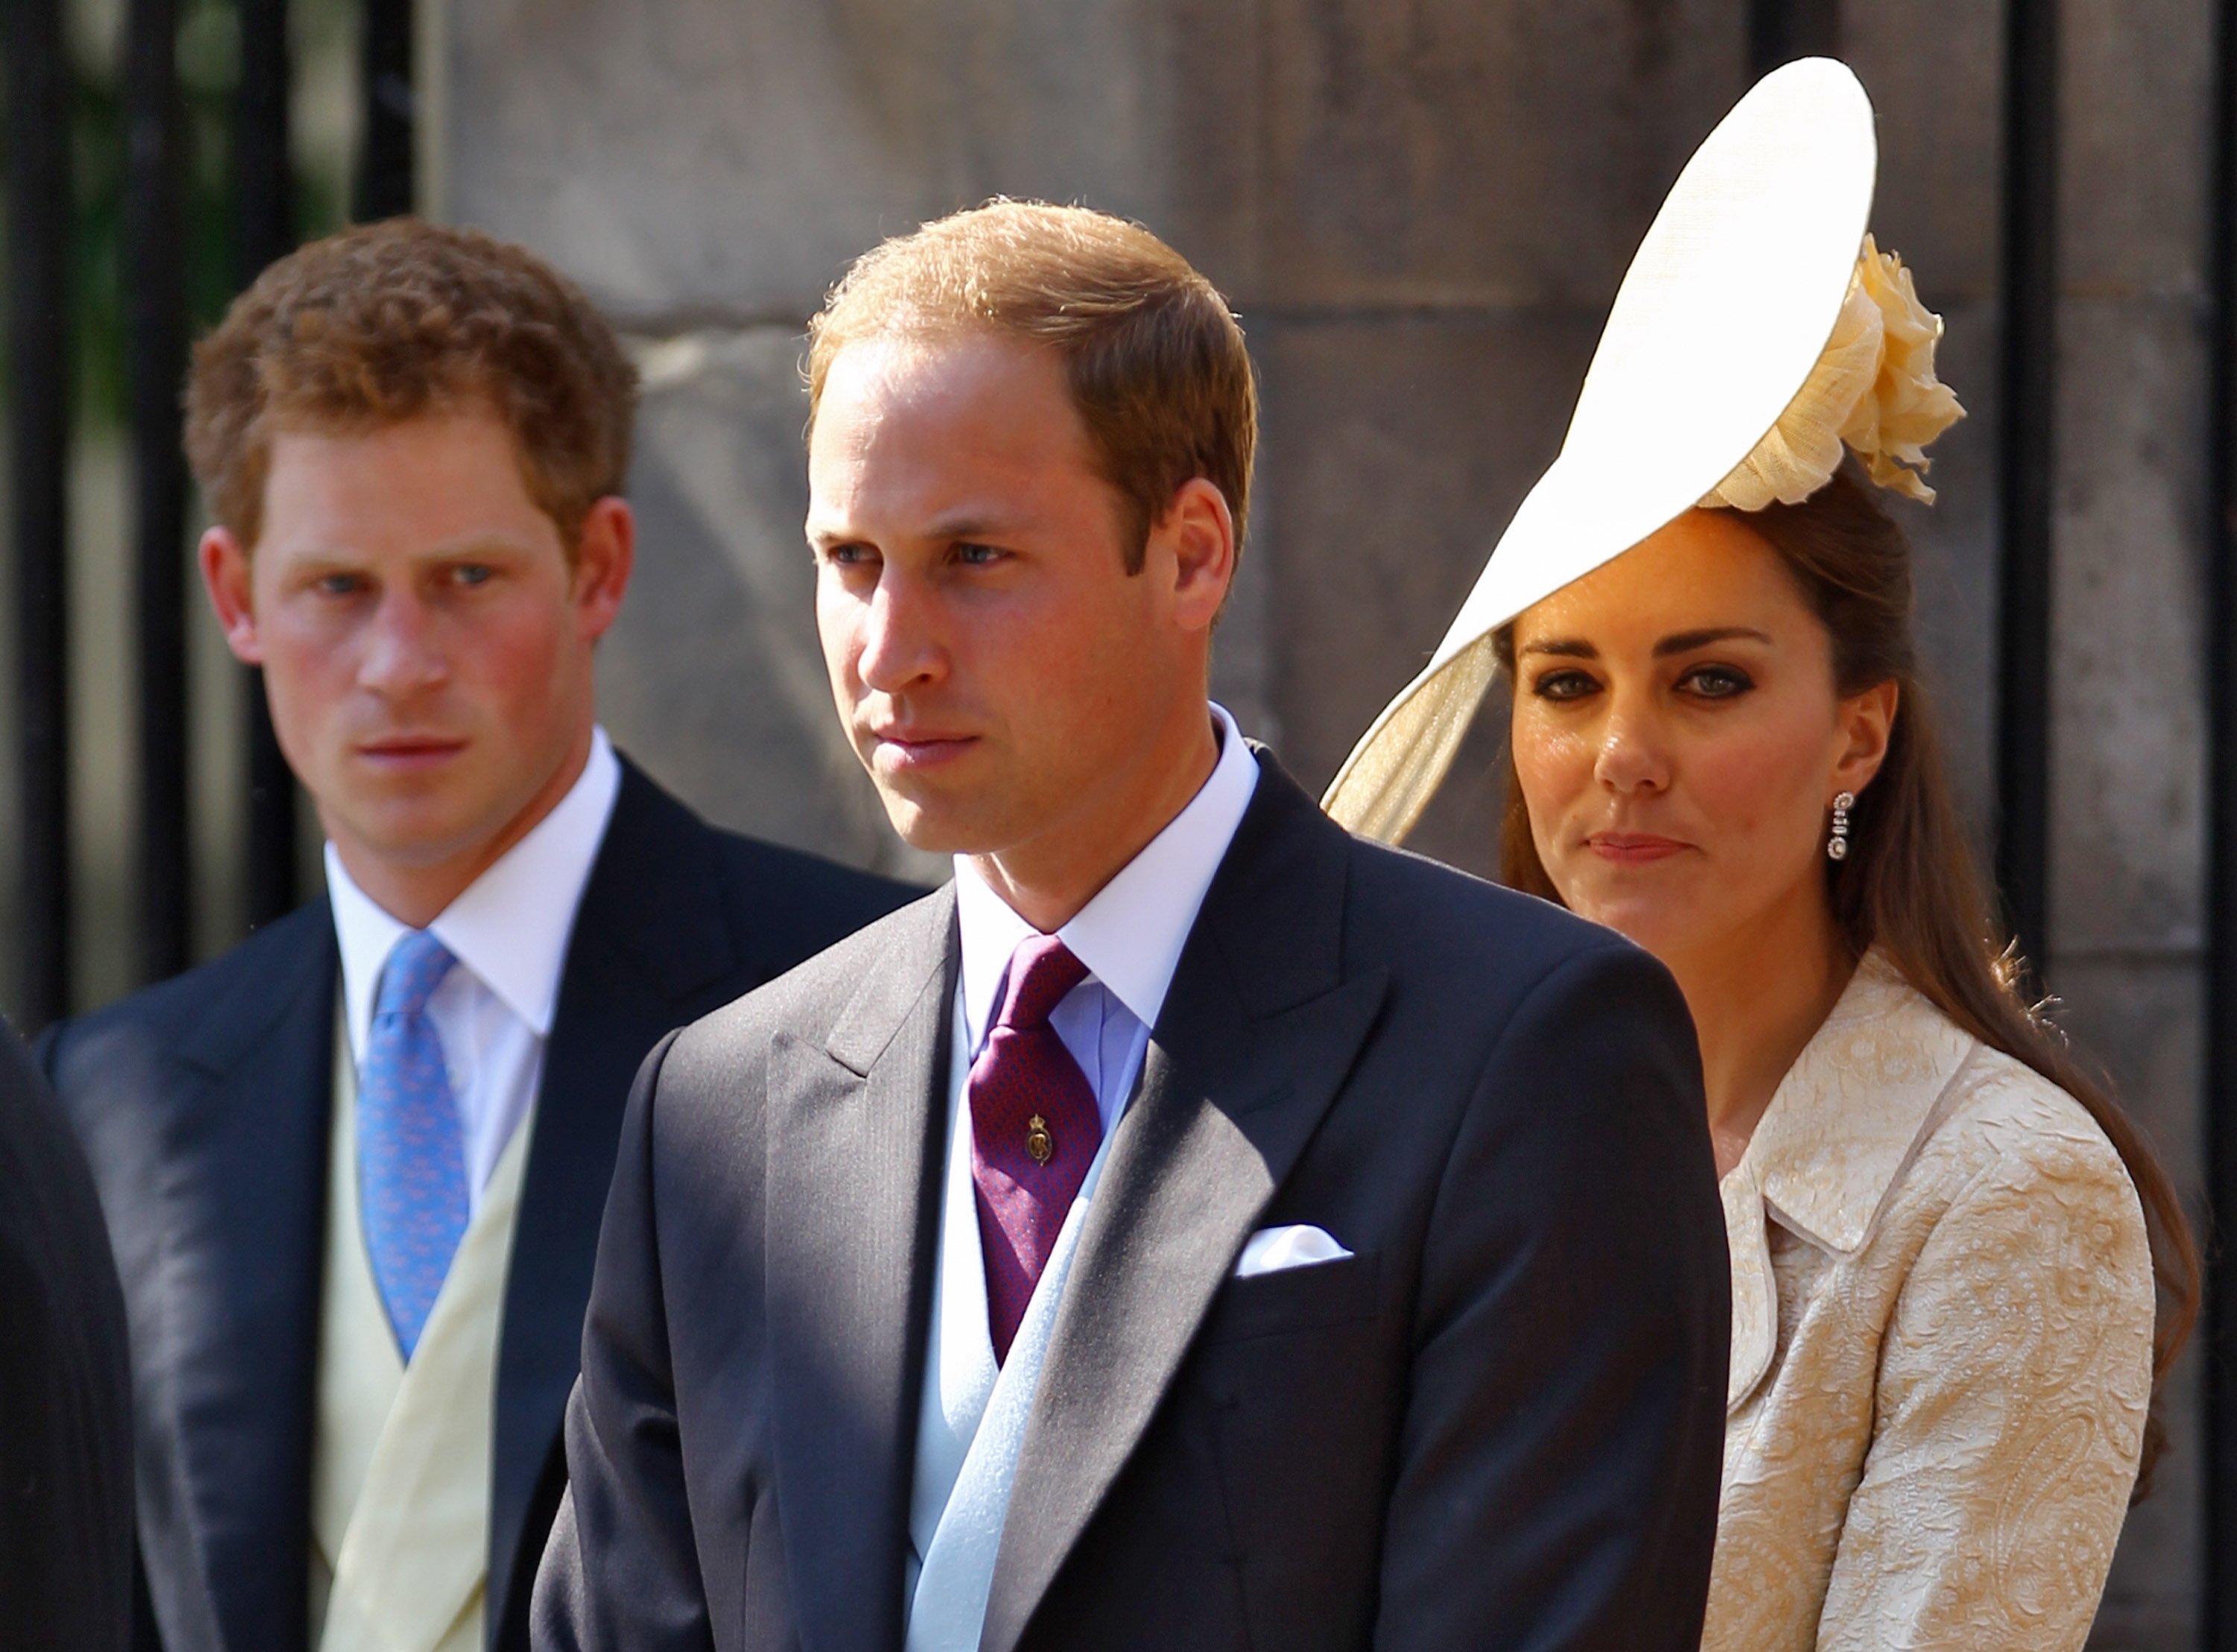 Prince Harry, Prince William, Duke of Cambridge and Catherine, Duchess of Cambridge depart after the Royal wedding of Zara Phillips and Mike Tindall at Canongate Kirk on July 30, 2011 in Edinburgh, Scotland | Source: Getty Images